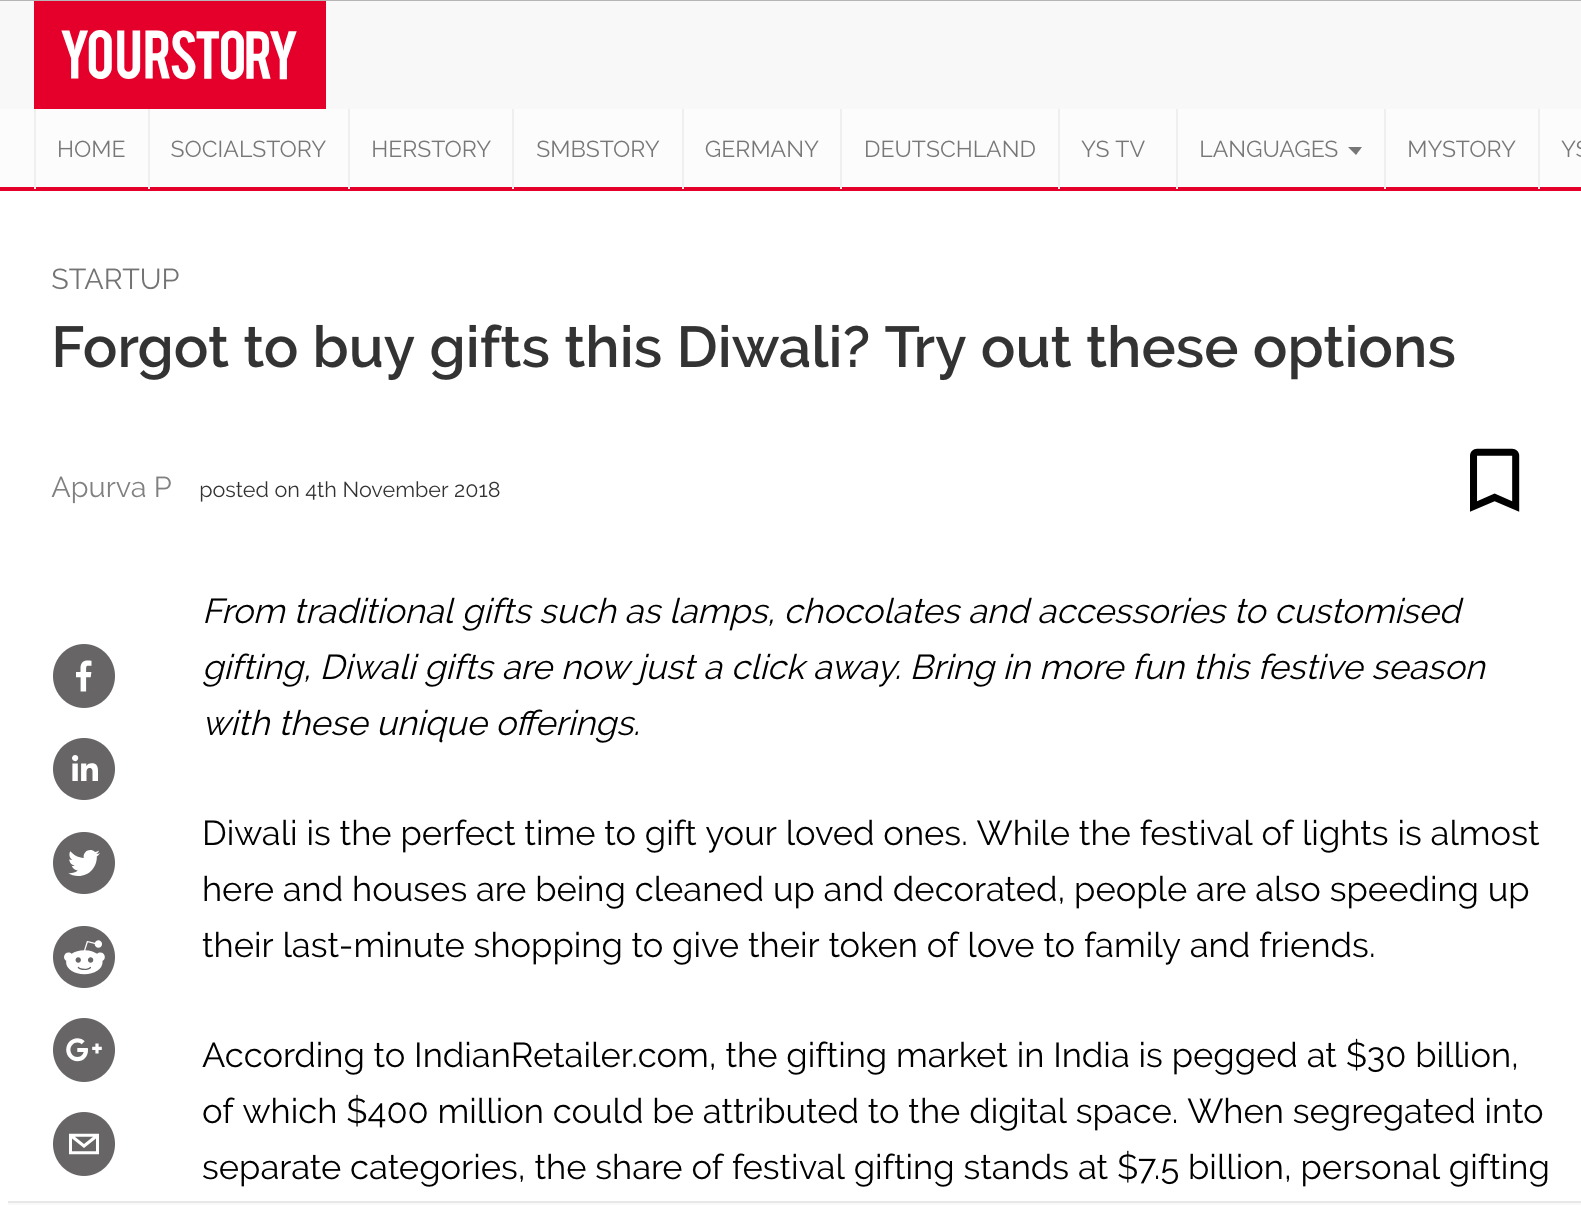 YourStory | Forgot to buy gifts this Diwali? Try out these options